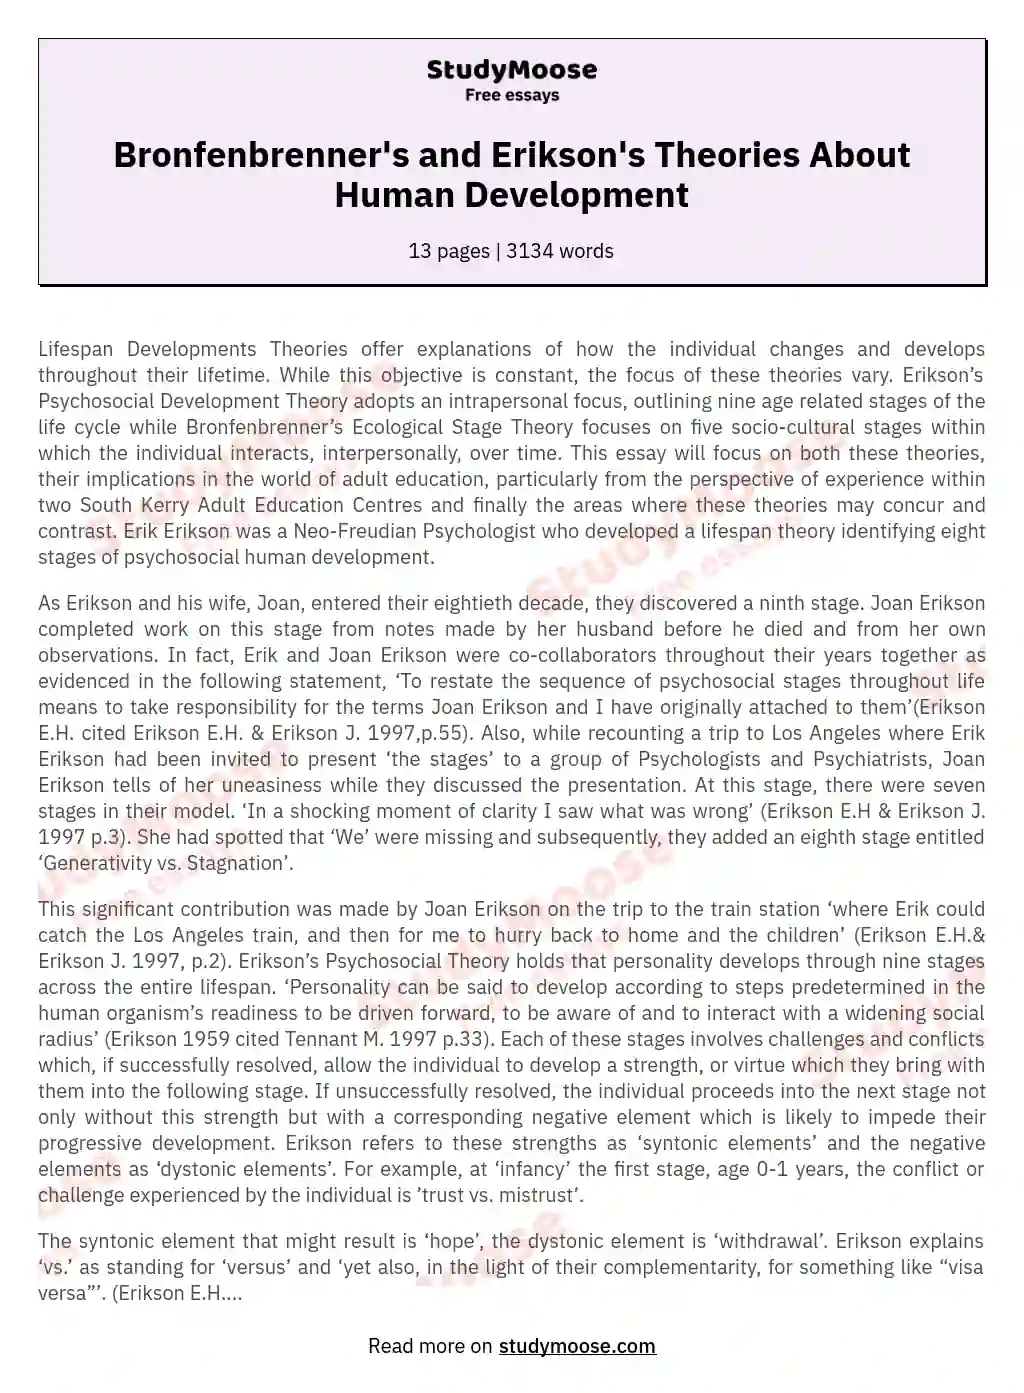 Bronfenbrenner's and Erikson's Theories About Human Development essay